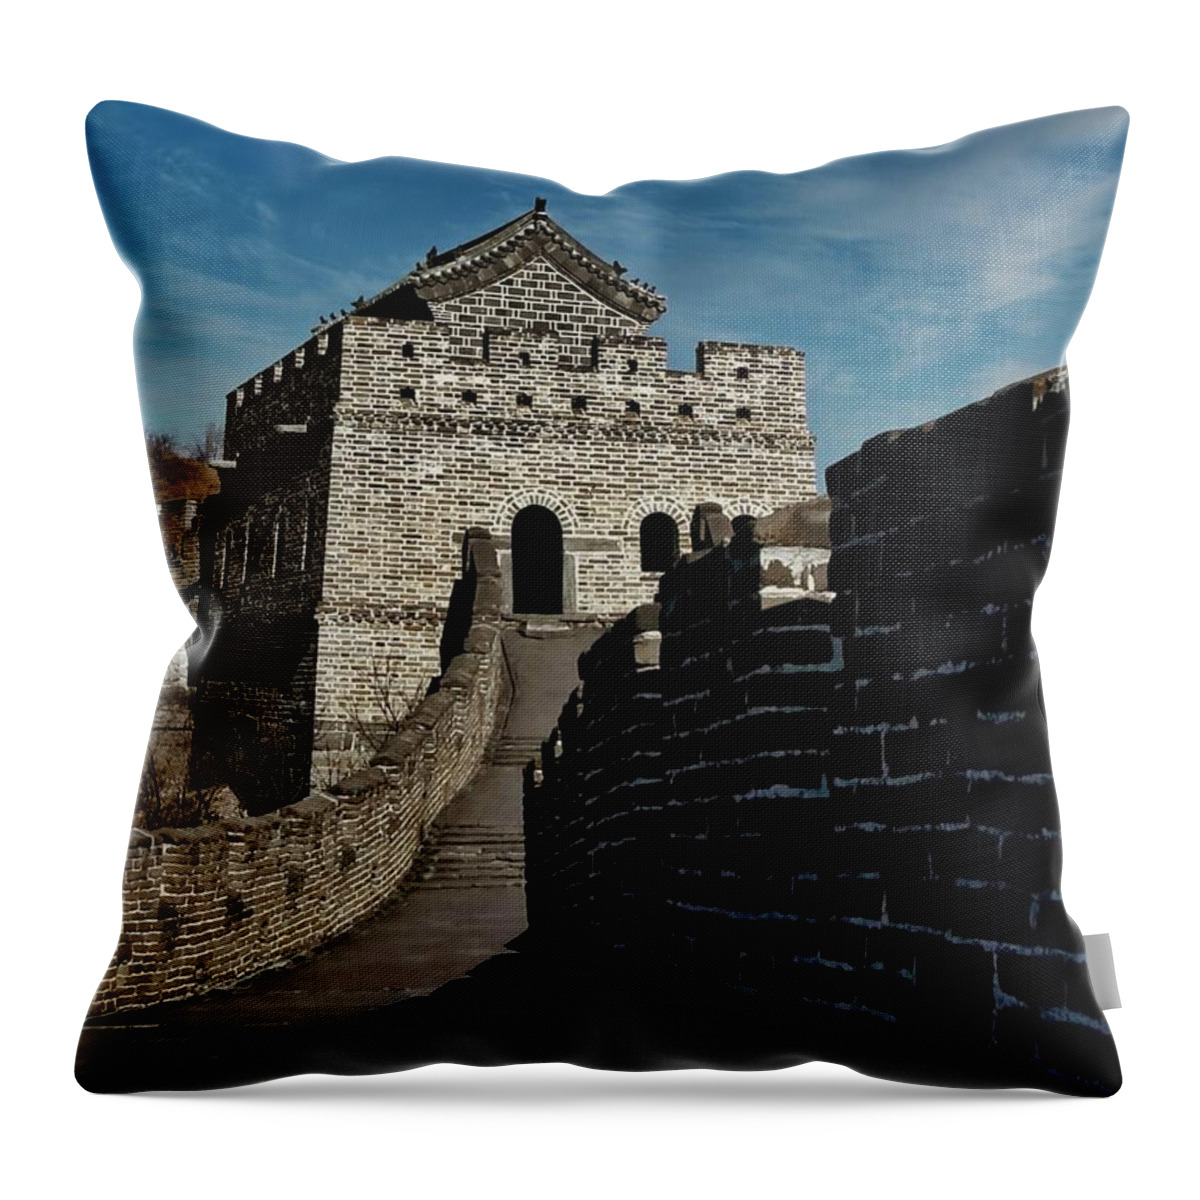 China Throw Pillow featuring the photograph Beacon Tower by Robert Knight